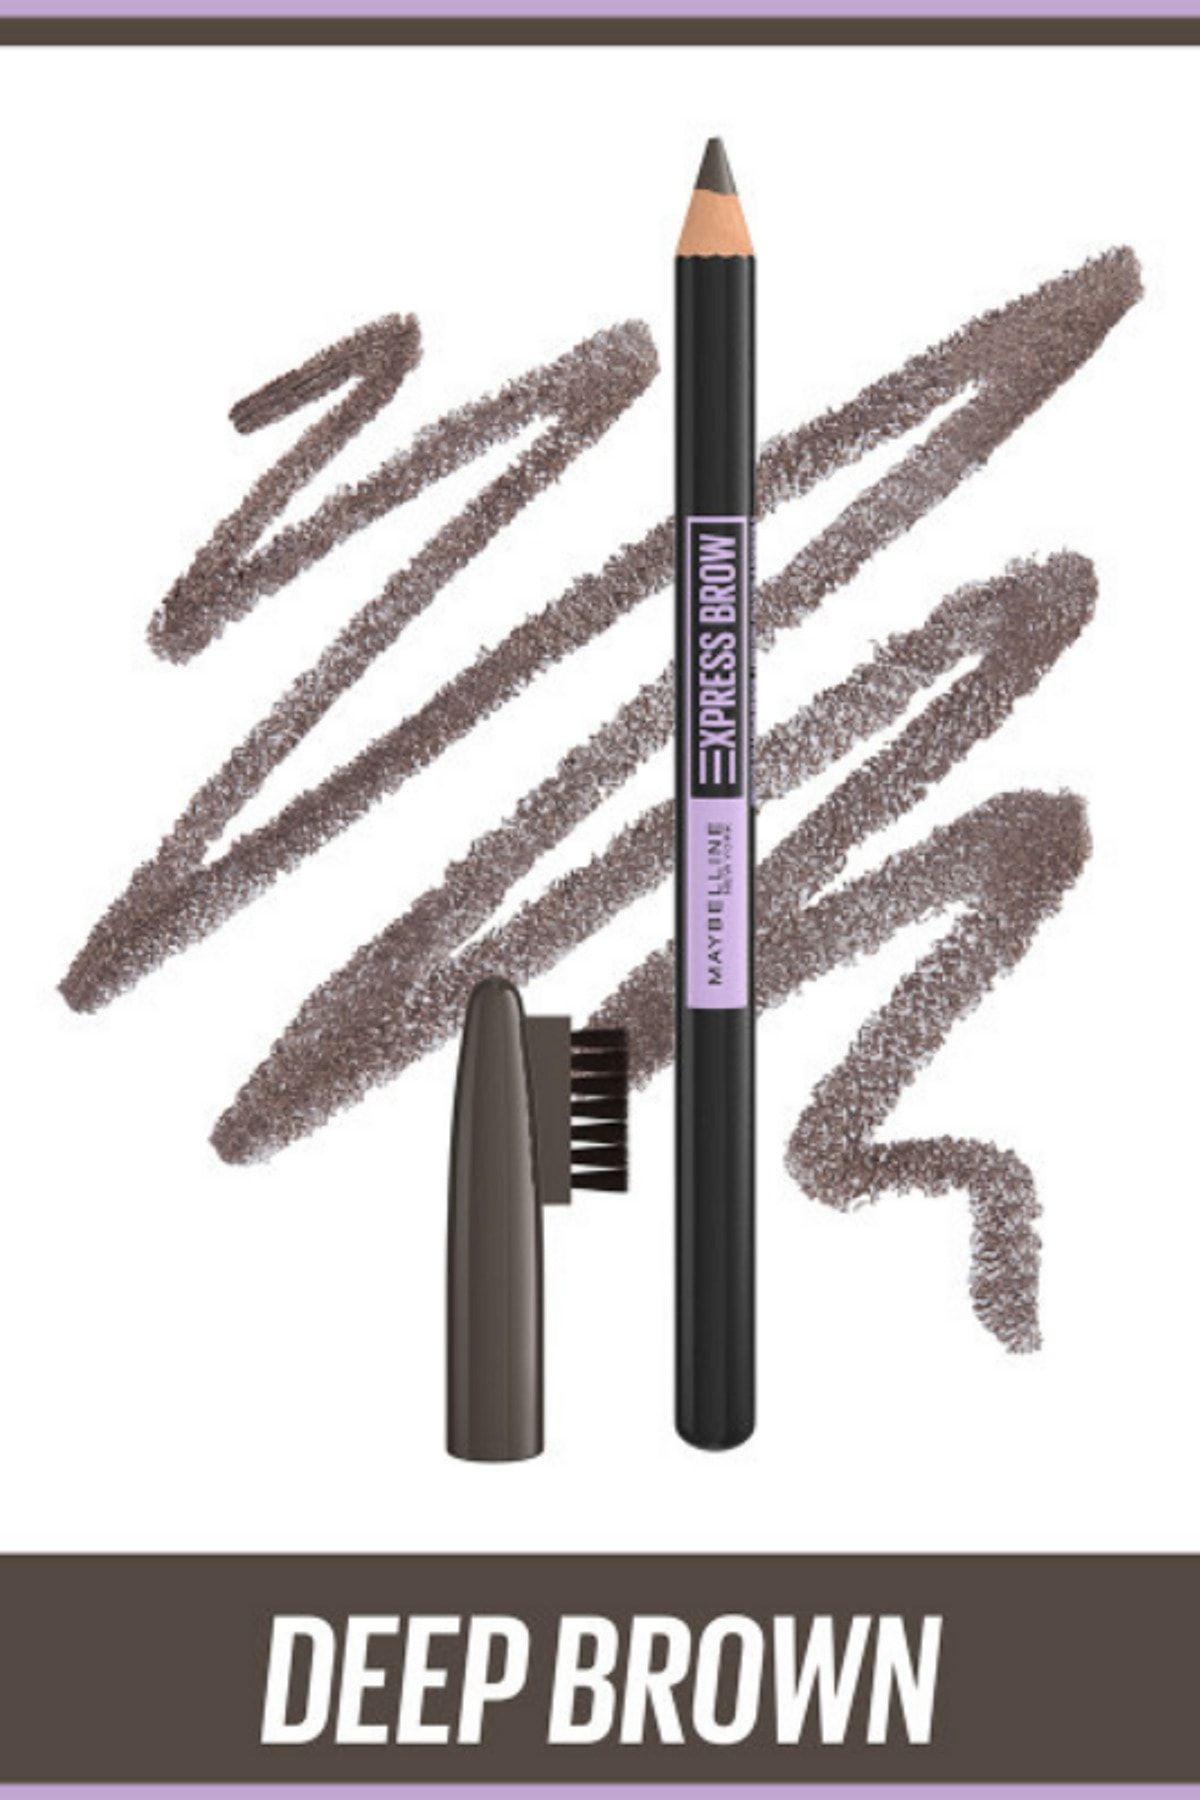 Maybelline New York Express Brow Shaping Pencil 05 Deep Brown